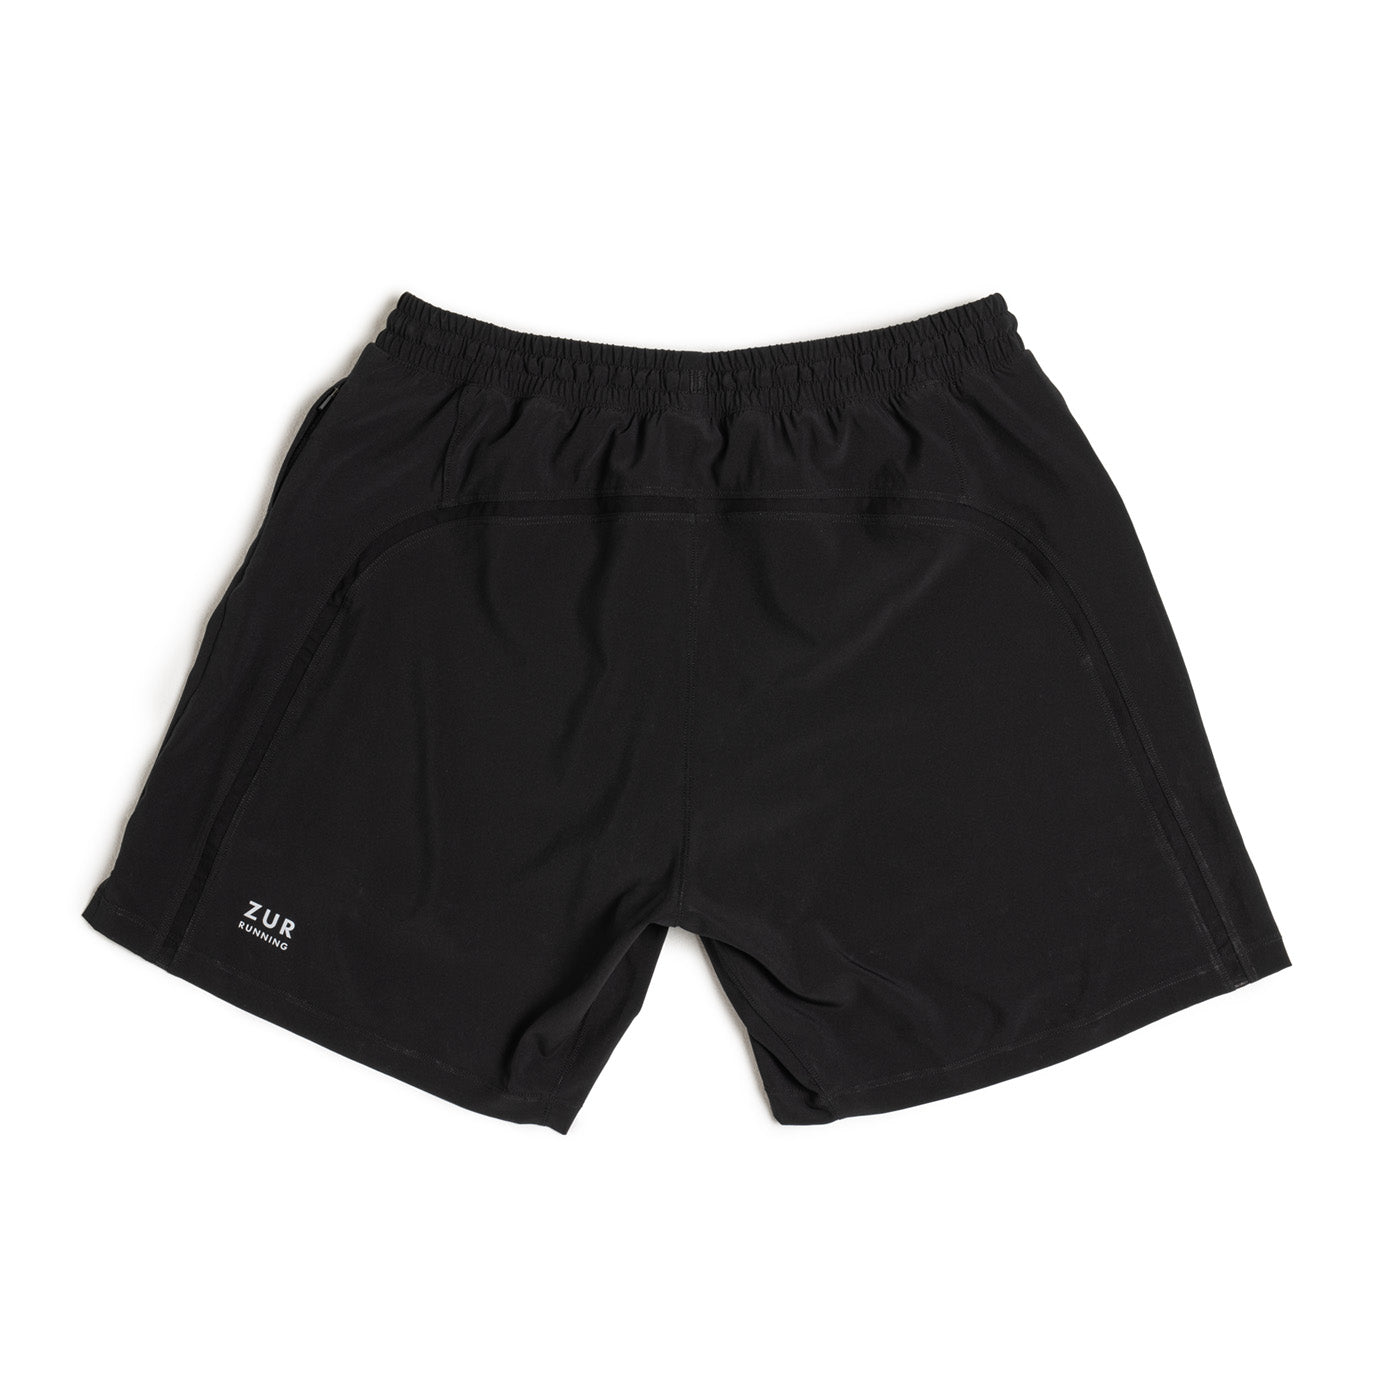 Designed for Running 2-in-1 Shorts, Performance